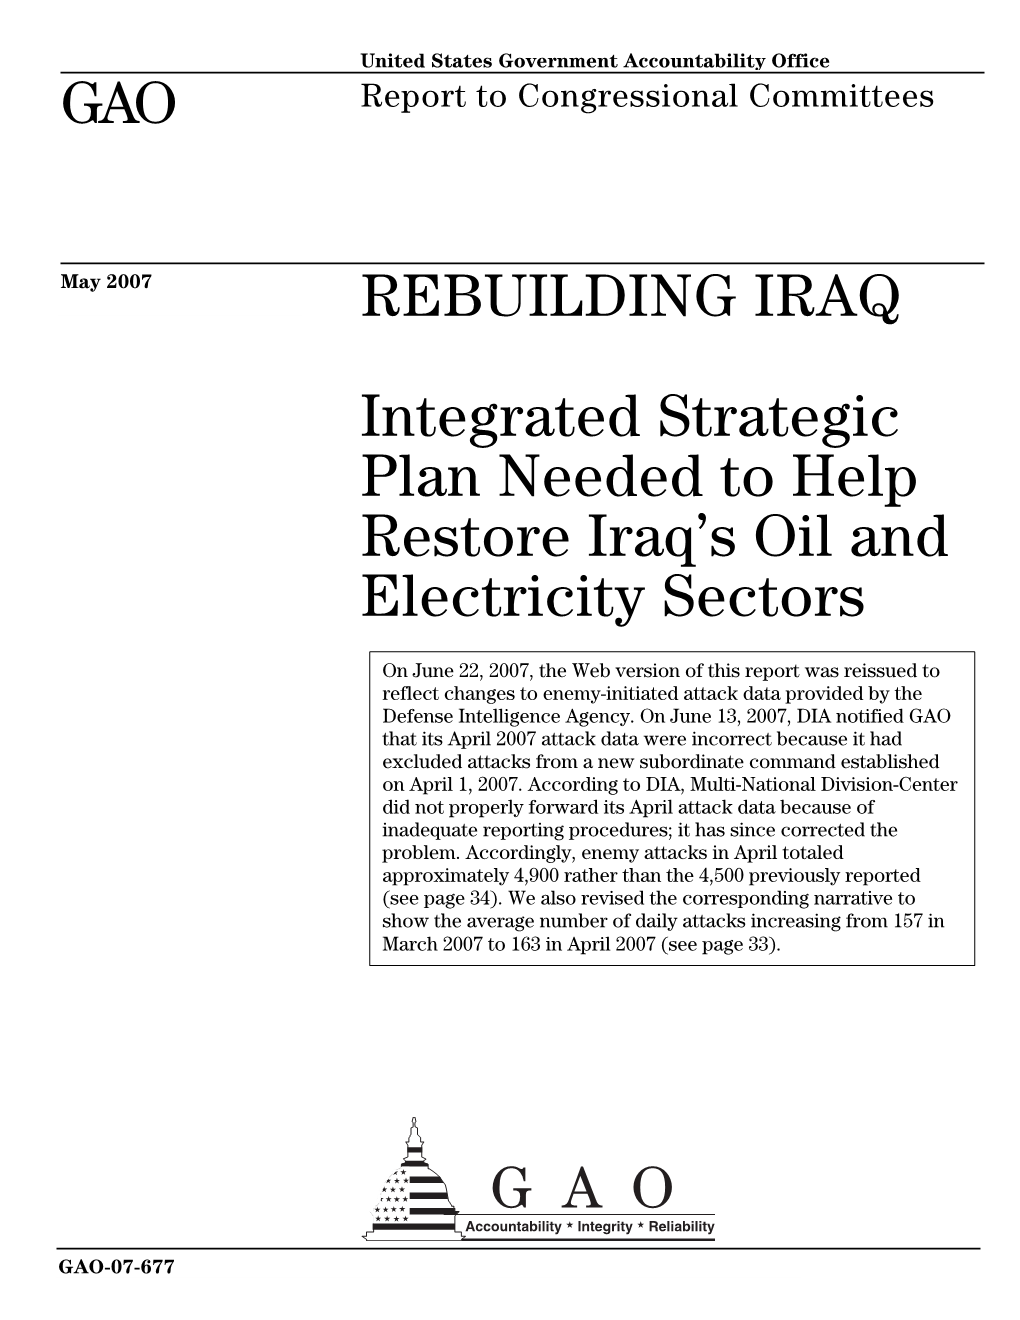 Integrated Strategic Plan Needed to Help Restore Iraq's Oil and Electricity Sectors